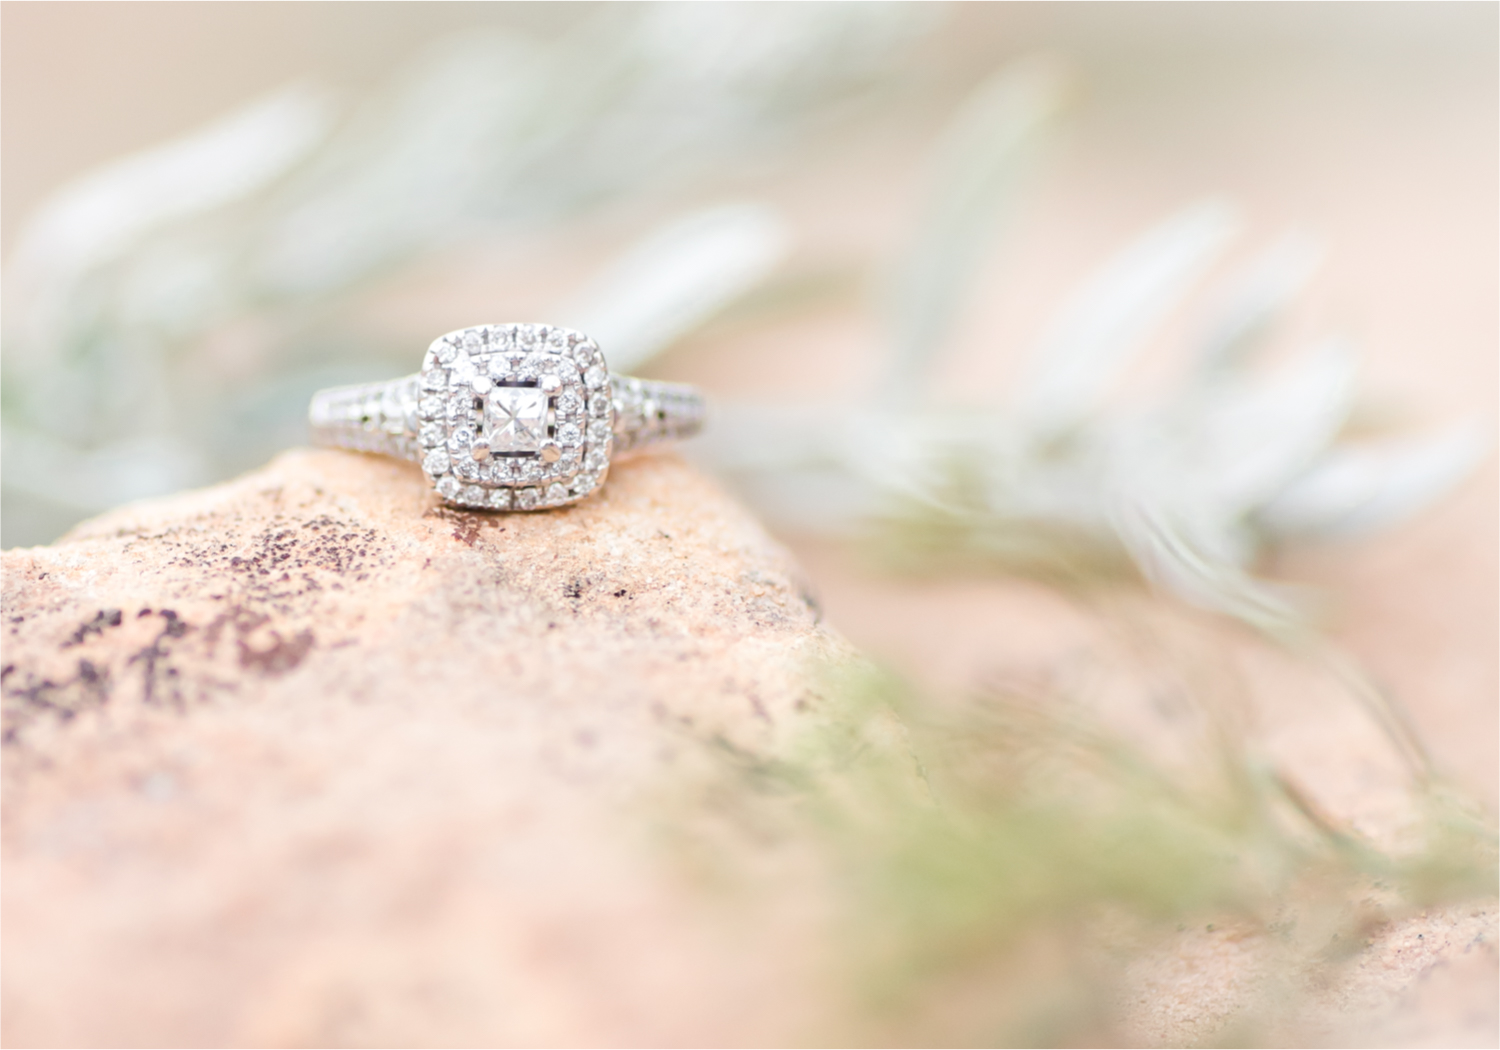 Romantic and Playful Summer engagement session at Horsetooth Reservoir in Fort Collins Colorado | Britni Girard Photographer | Wedding photographer and videographer team | Gorgeous Engagement Ring